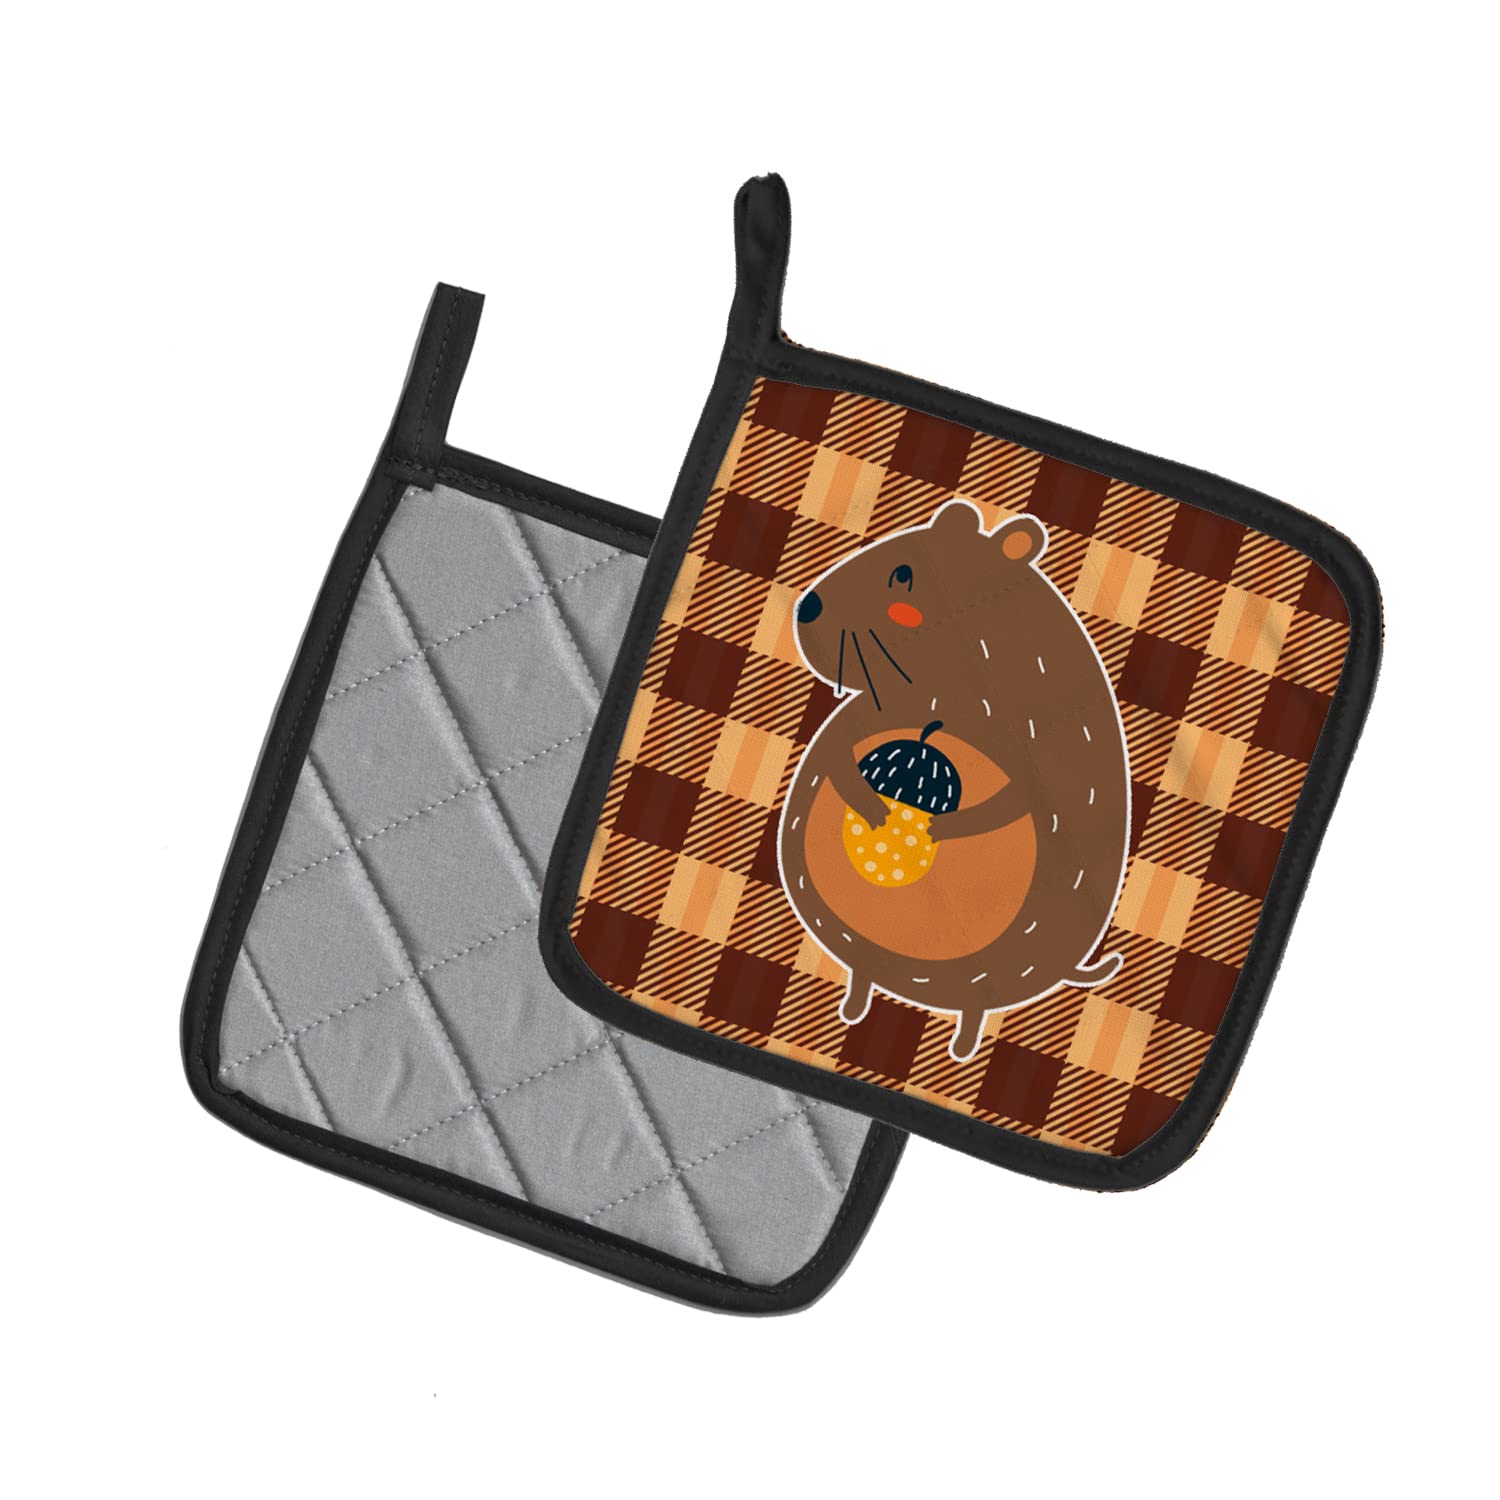 Caroline's Treasures BB6766PTHD Squirrel with a Nut Pair of Pot Holders Kitchen Heat Resistant Pot Holders Sets Oven Hot Pads for Cooking Baking BBQ, 7 1/2 x 7 1/2